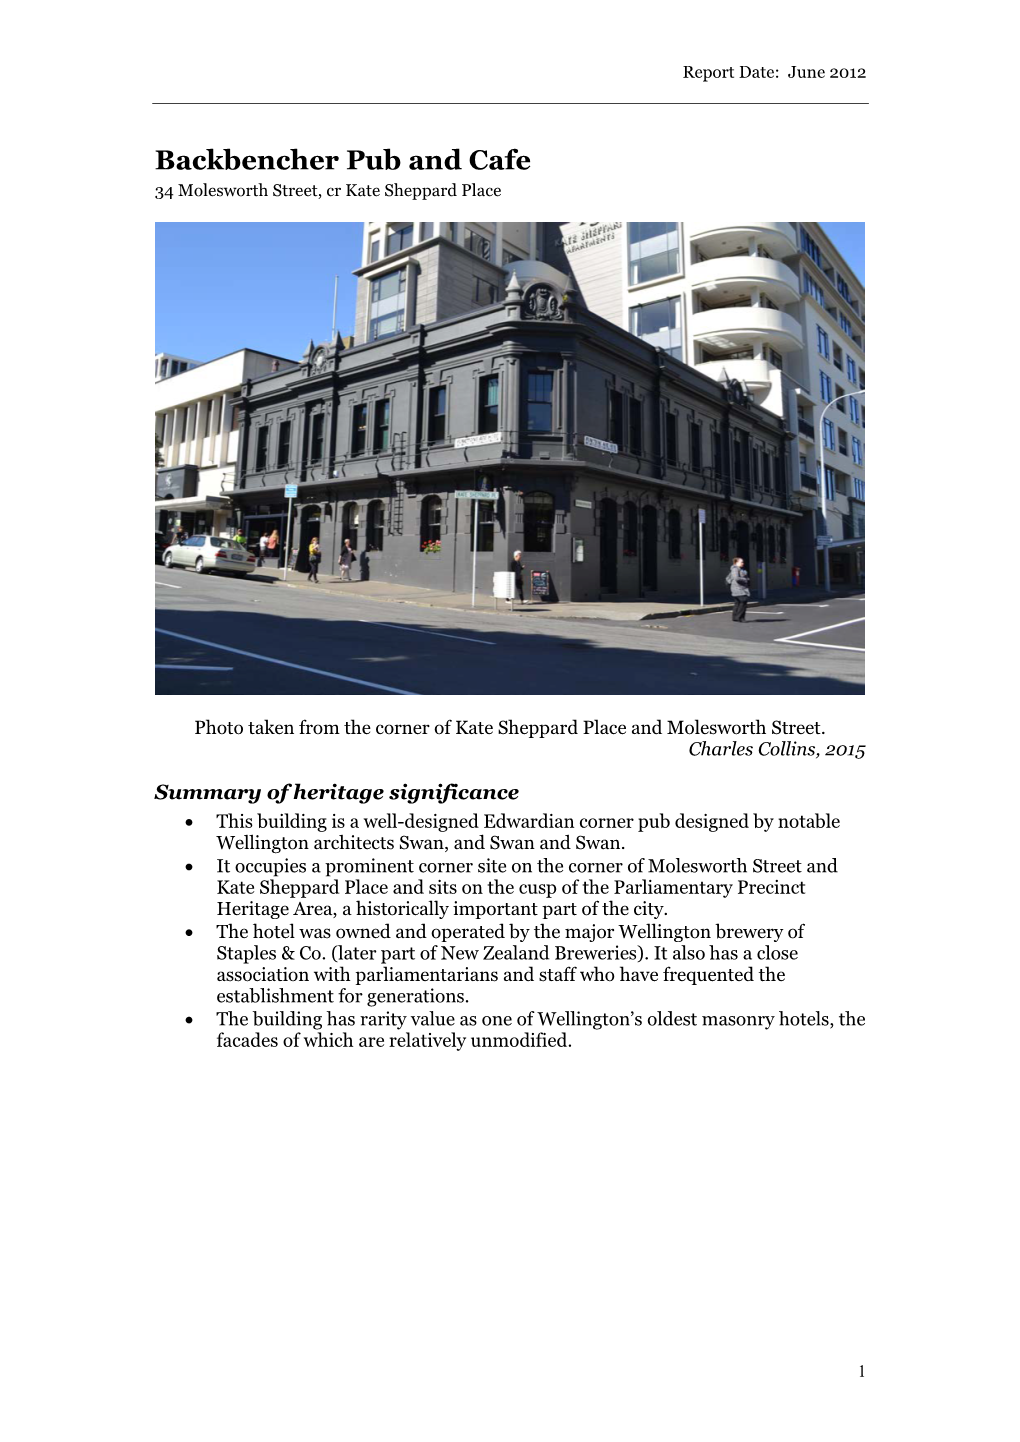 Backbencher Pub and Cafe 34 Molesworth Street, Cr Kate Sheppard Place